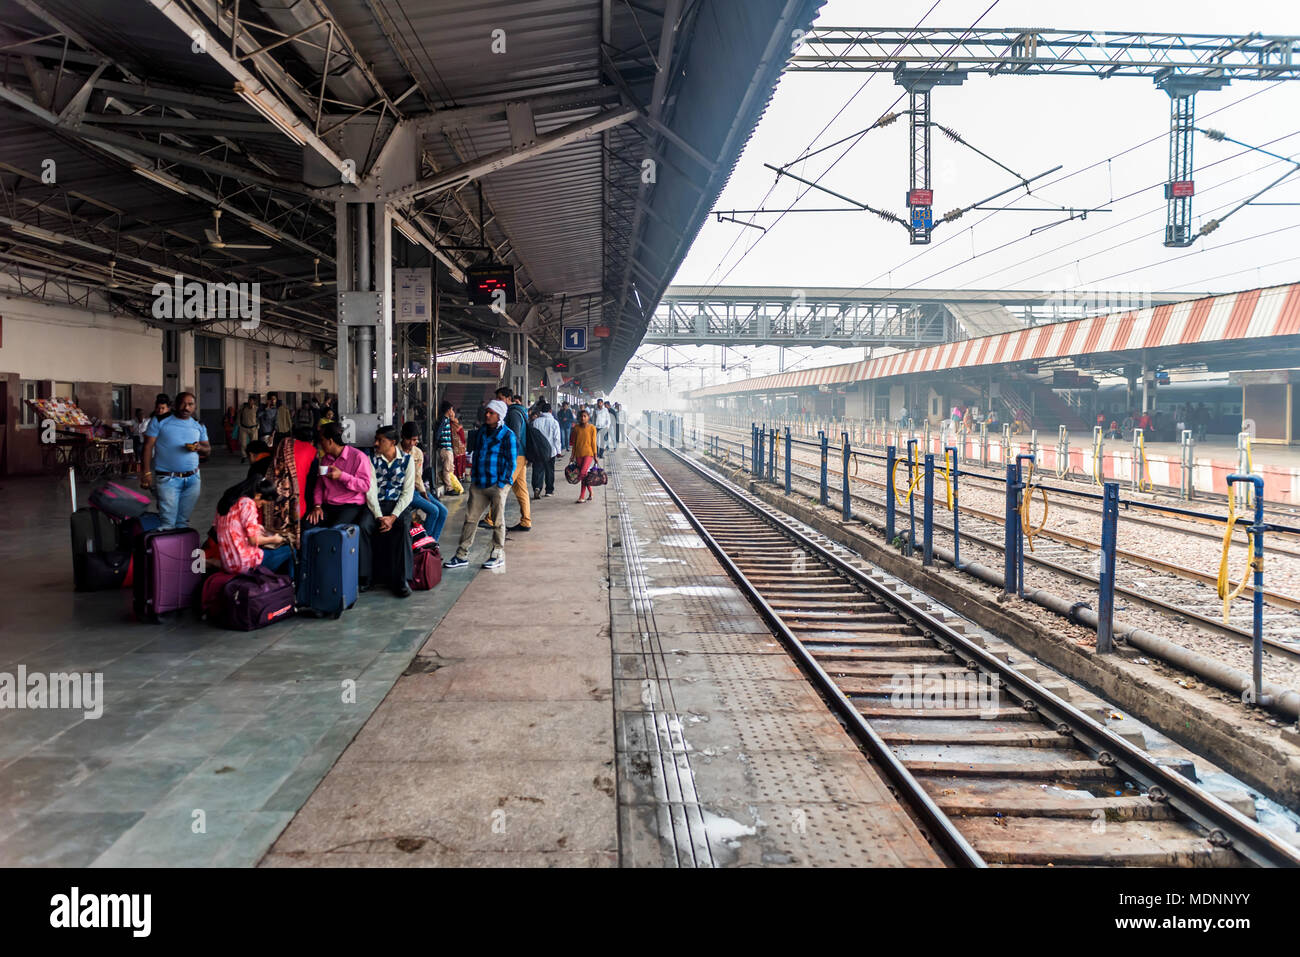 AGRA, INDIA - NOVEMBER 9, 2017: People at train station in Agra, India Stock Photo